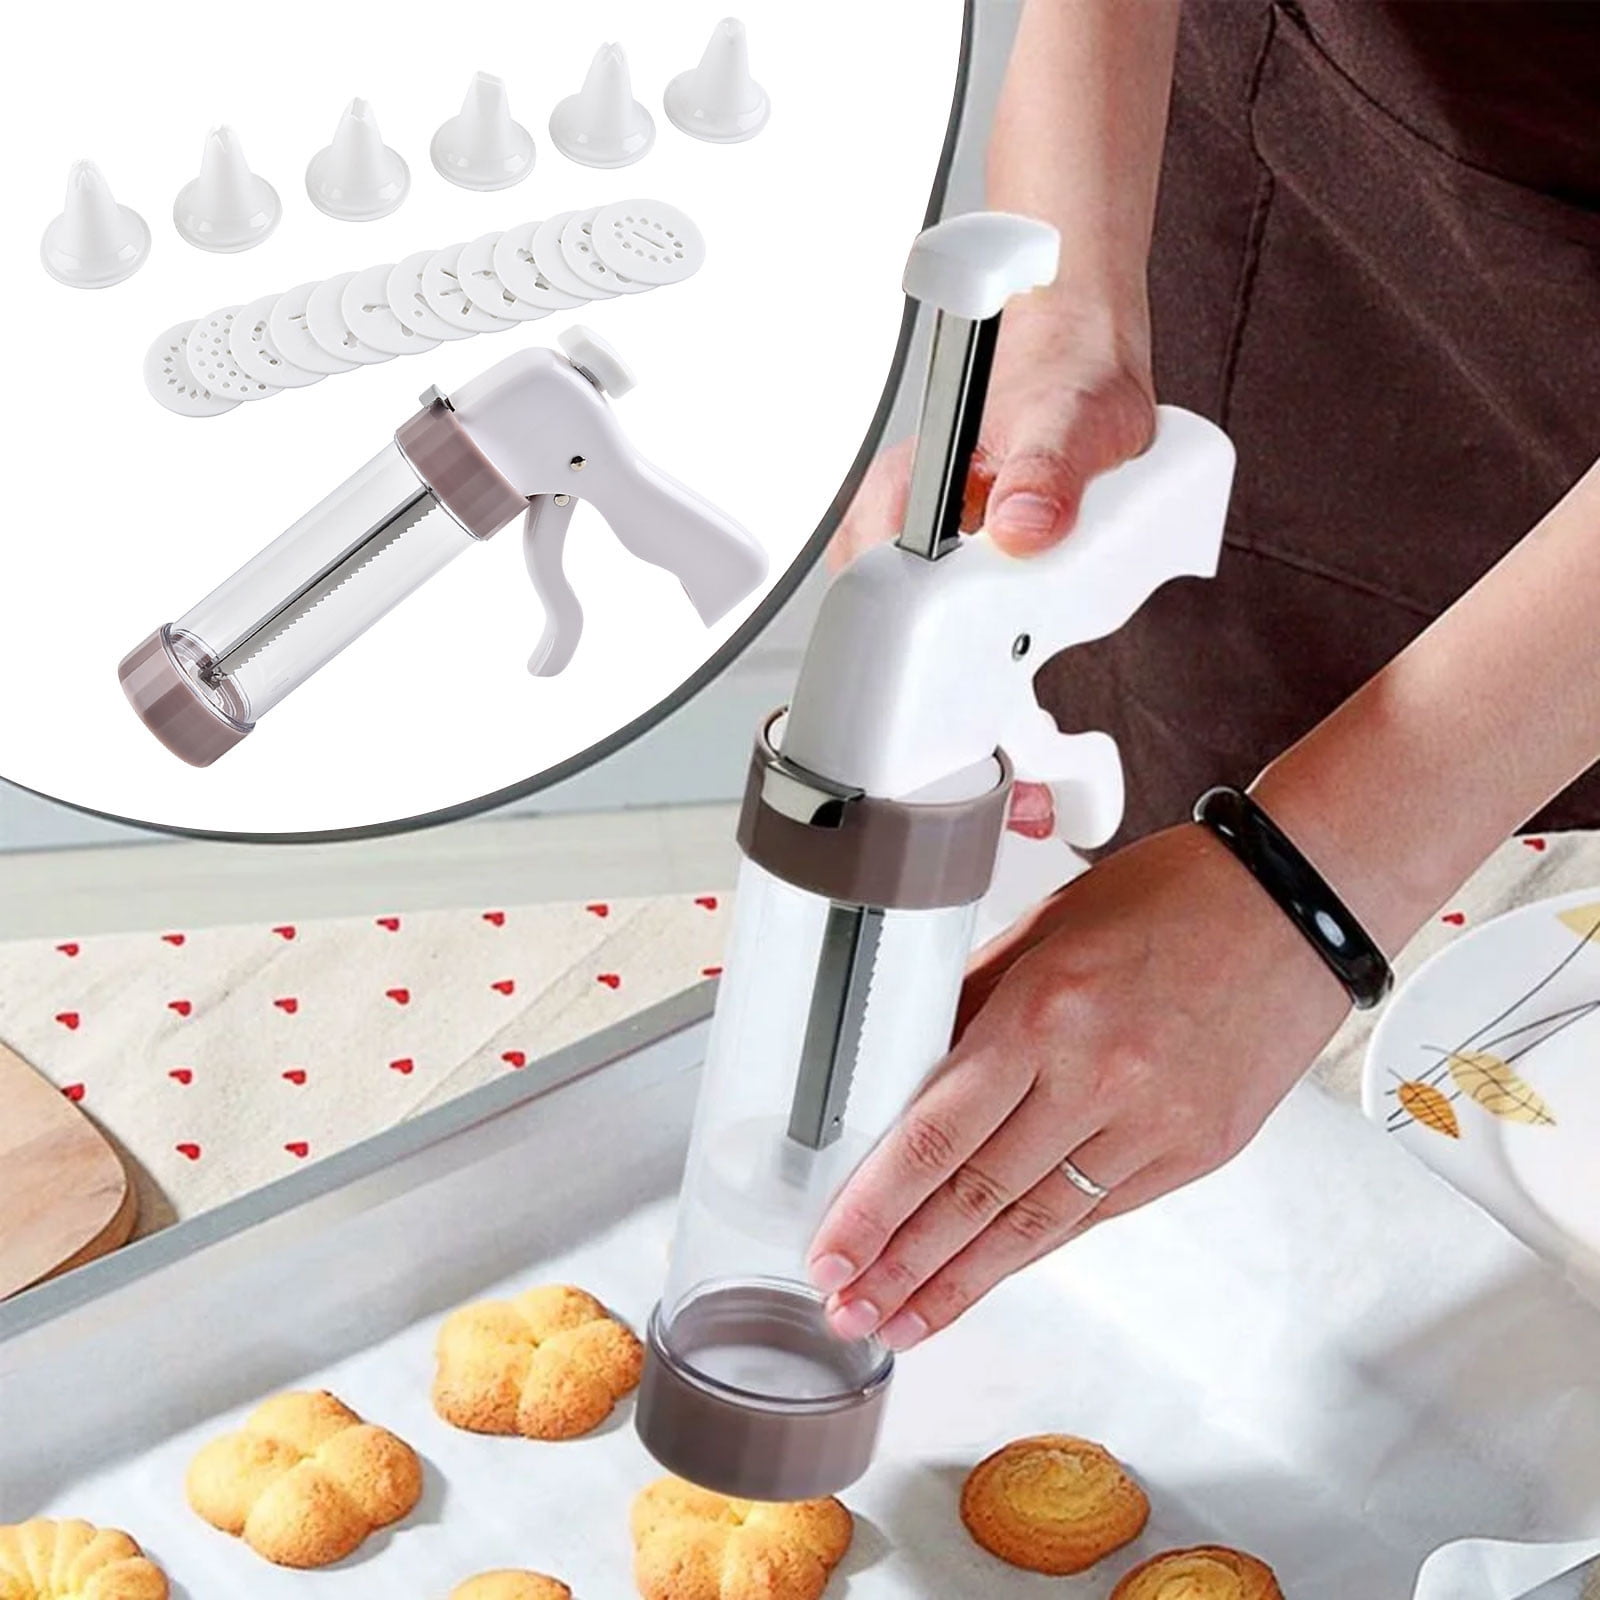 Shengxiny Kitchen Supplies Clearance Manual Cookie Extruder Embossing Extruder Butter Extruder Embossing Extruder Baking Tool, Adult Unisex, Size: One